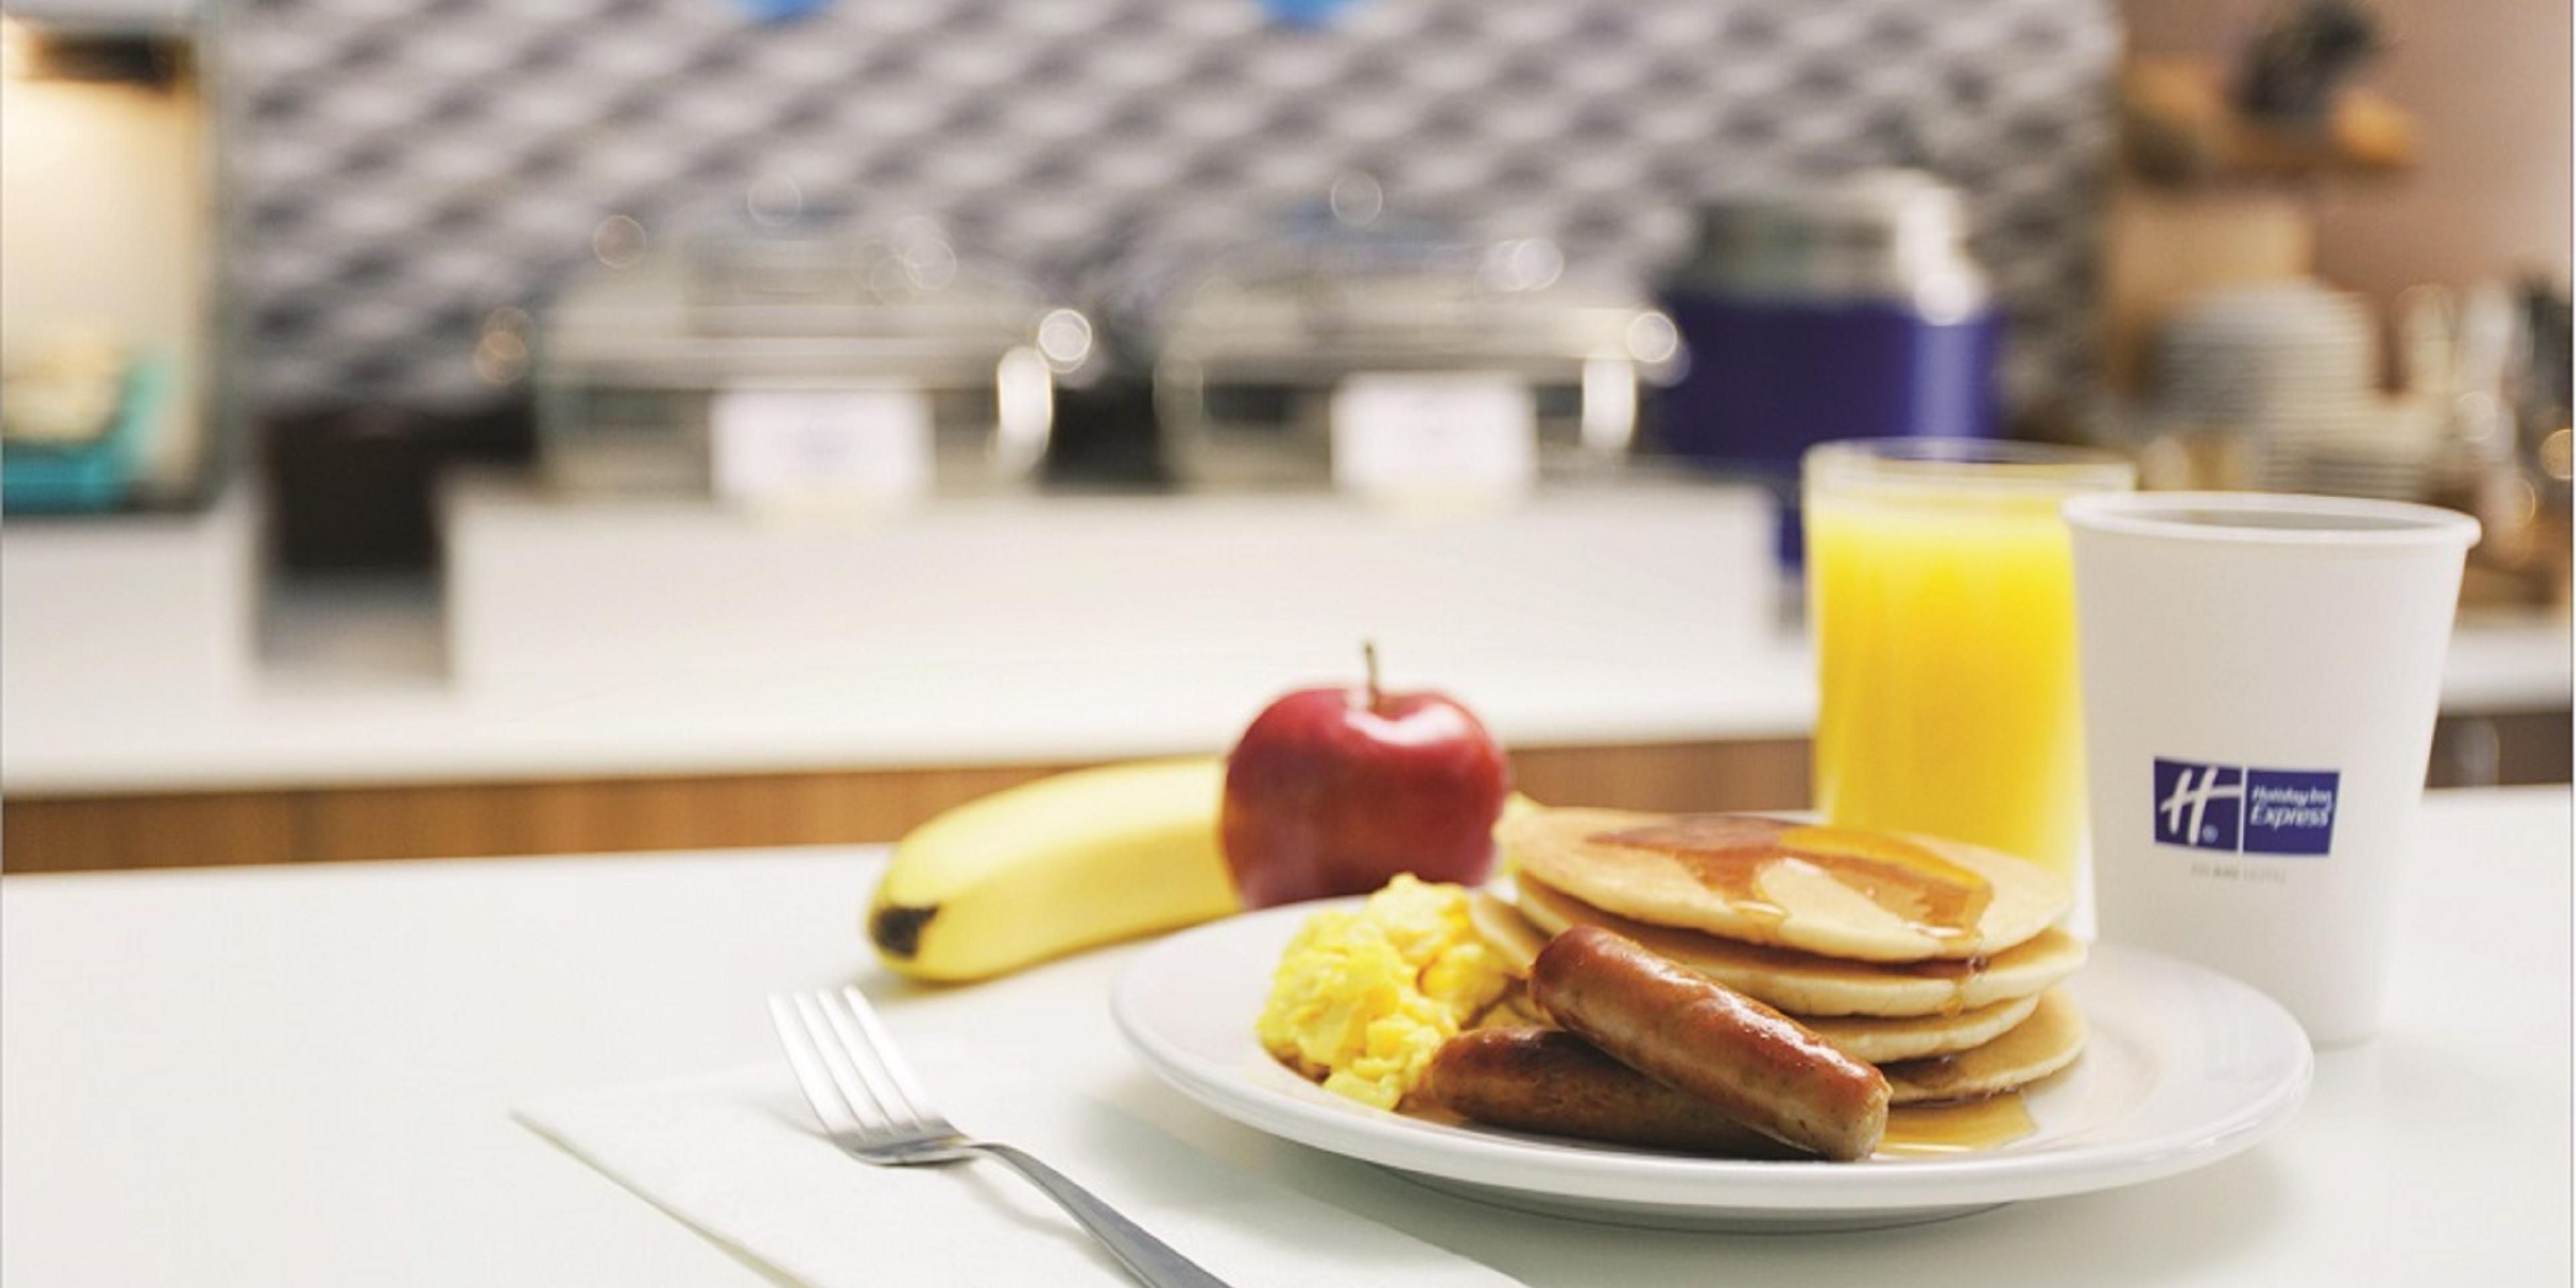 Start your day off to an amazing beginning with our free breakfast! Join us at our Express Start Cafe, where we offer a hot menu option and additional items to kick off your day!  